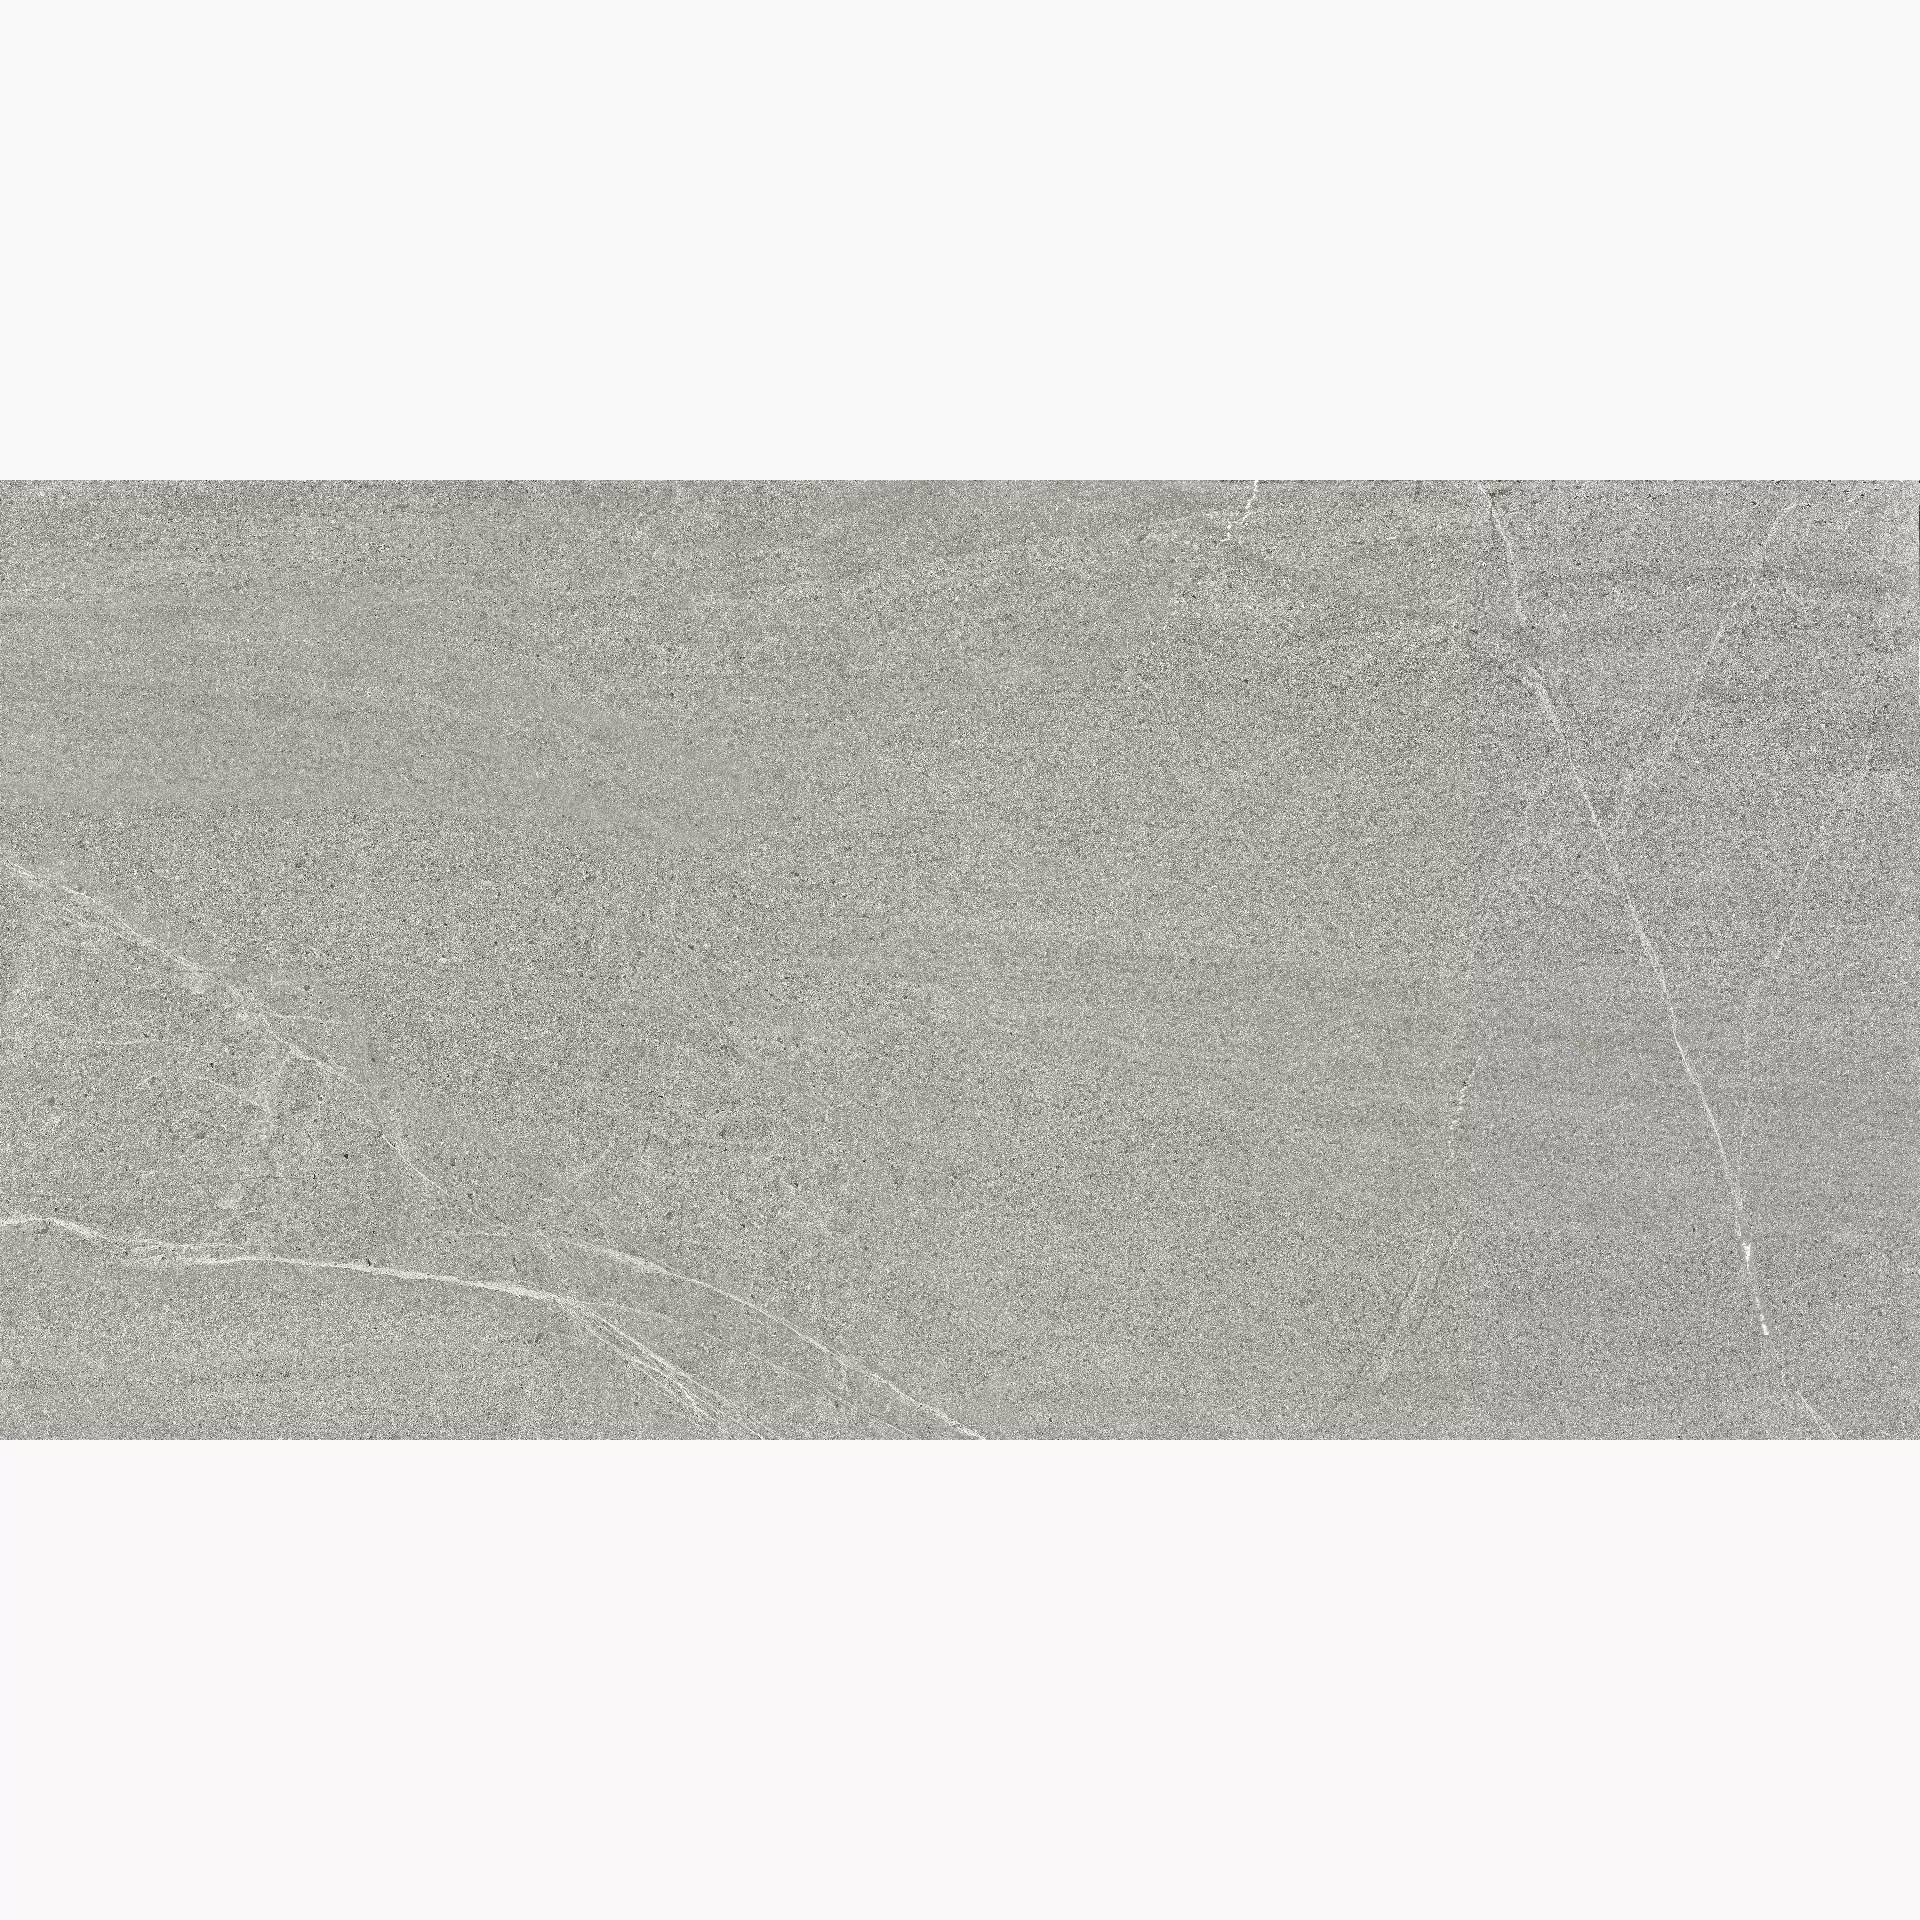 Cottodeste Limestone Oyster Naturale Protect EGXLS21 60x120cm rectified 14mm